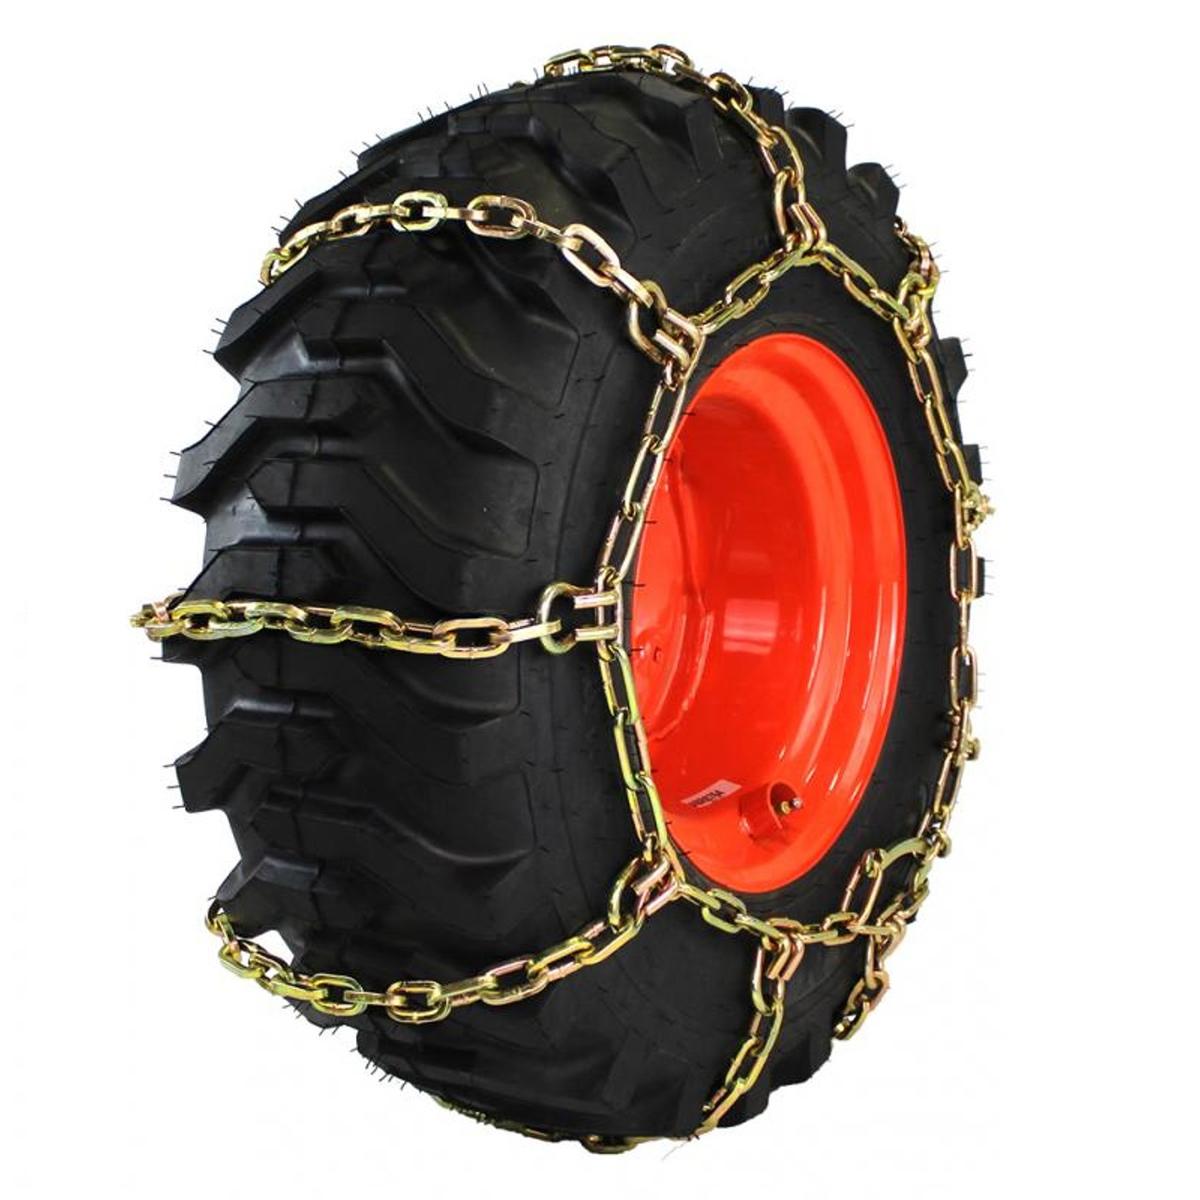 8mm Studded Alloy 4 Link Skid Loader Tire Chains Best Skid Steer Chains For Snow And Ice